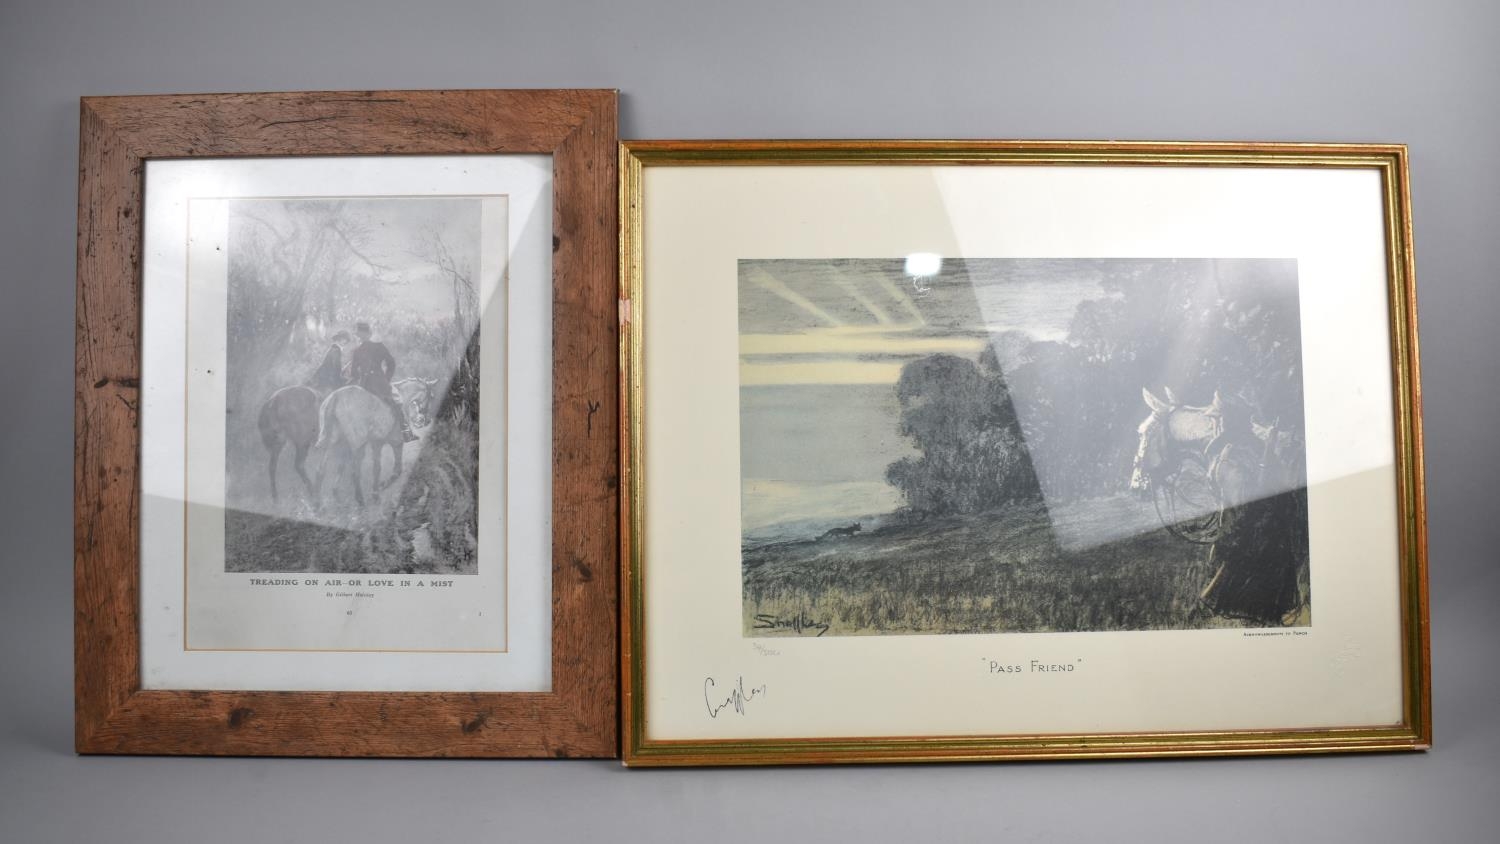 A Framed Hunting Gilbert Holiday Print, 'Treading on Air-Or Love in a Mist' and a Framed Limited